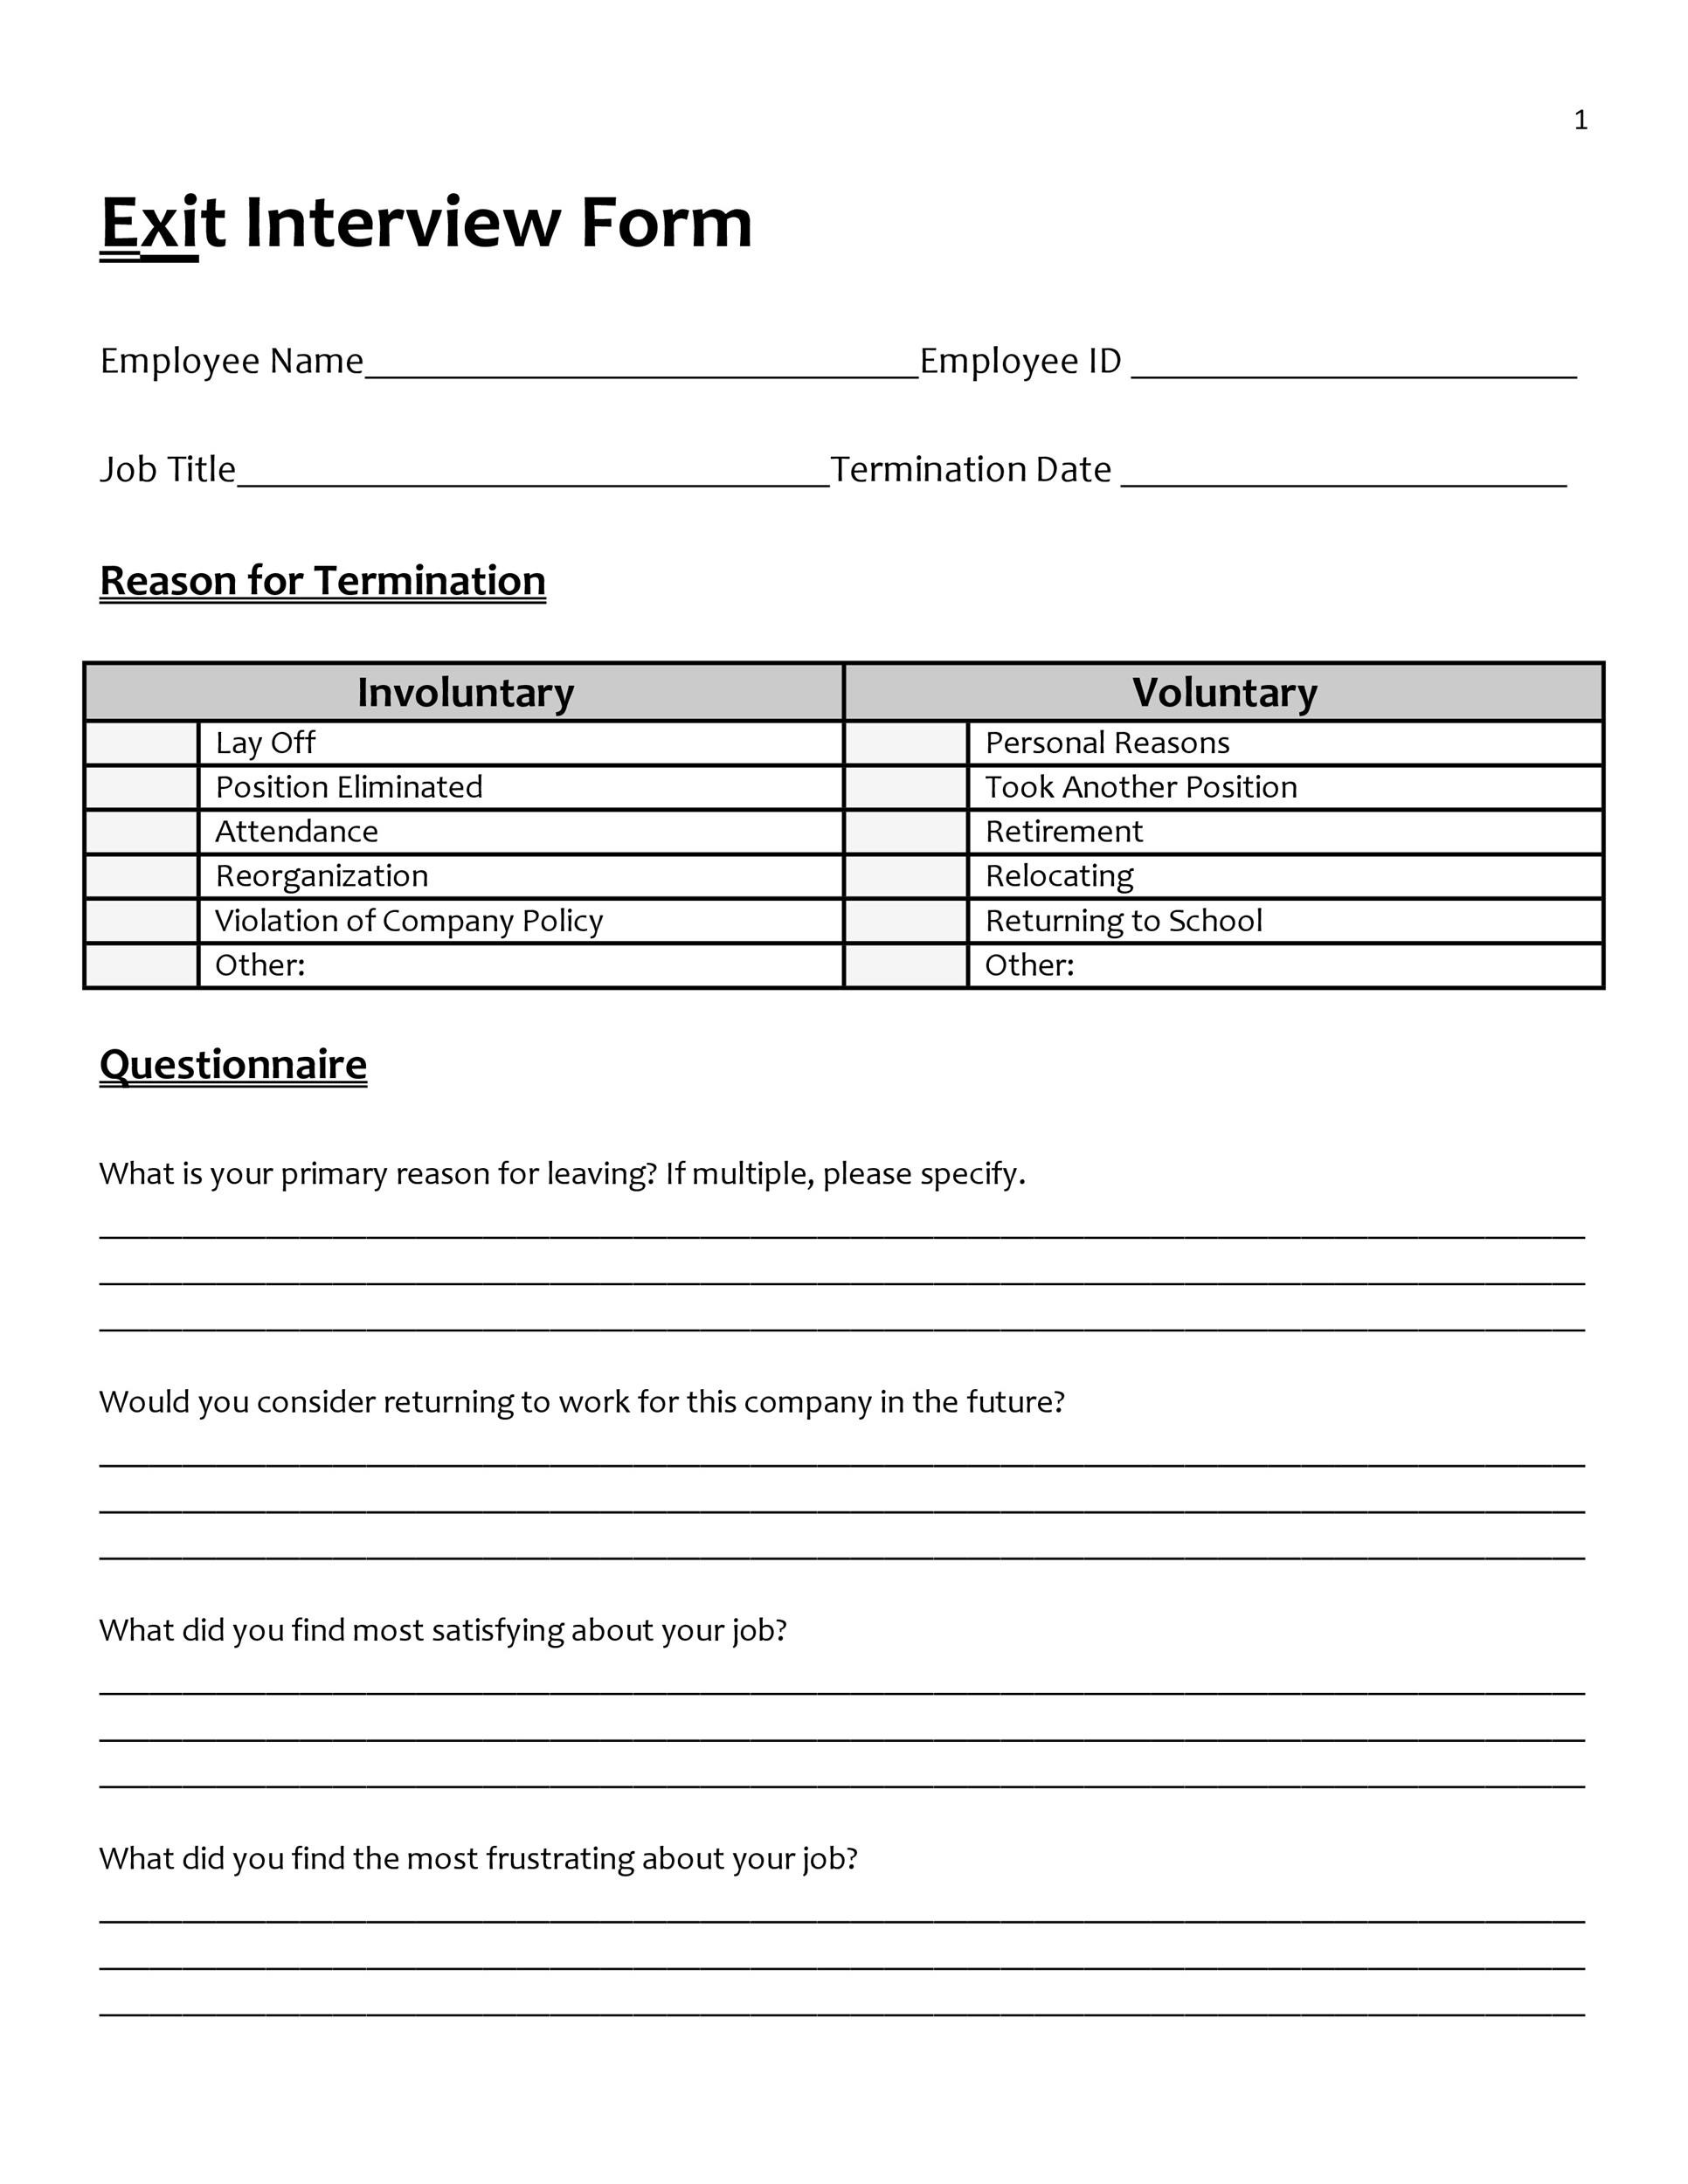 interview-form-template-tutore-org-master-of-documents